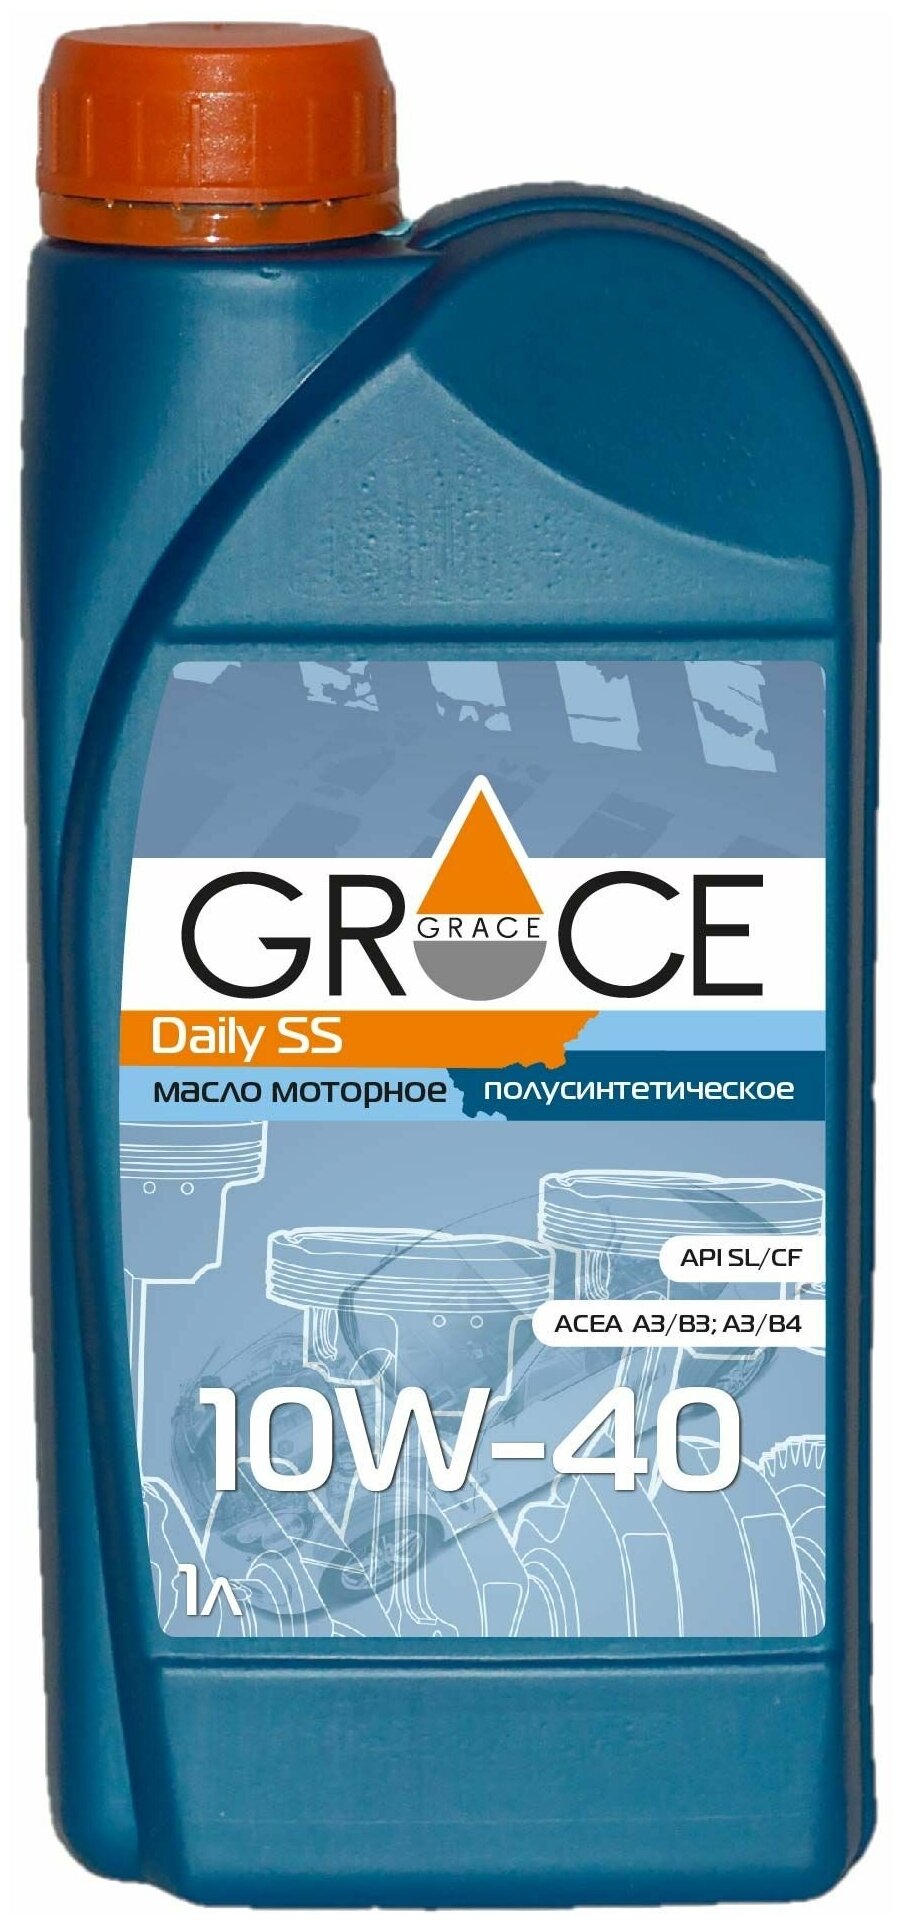 Моторное масло Grace Daily SS 10W-40, 1 литр